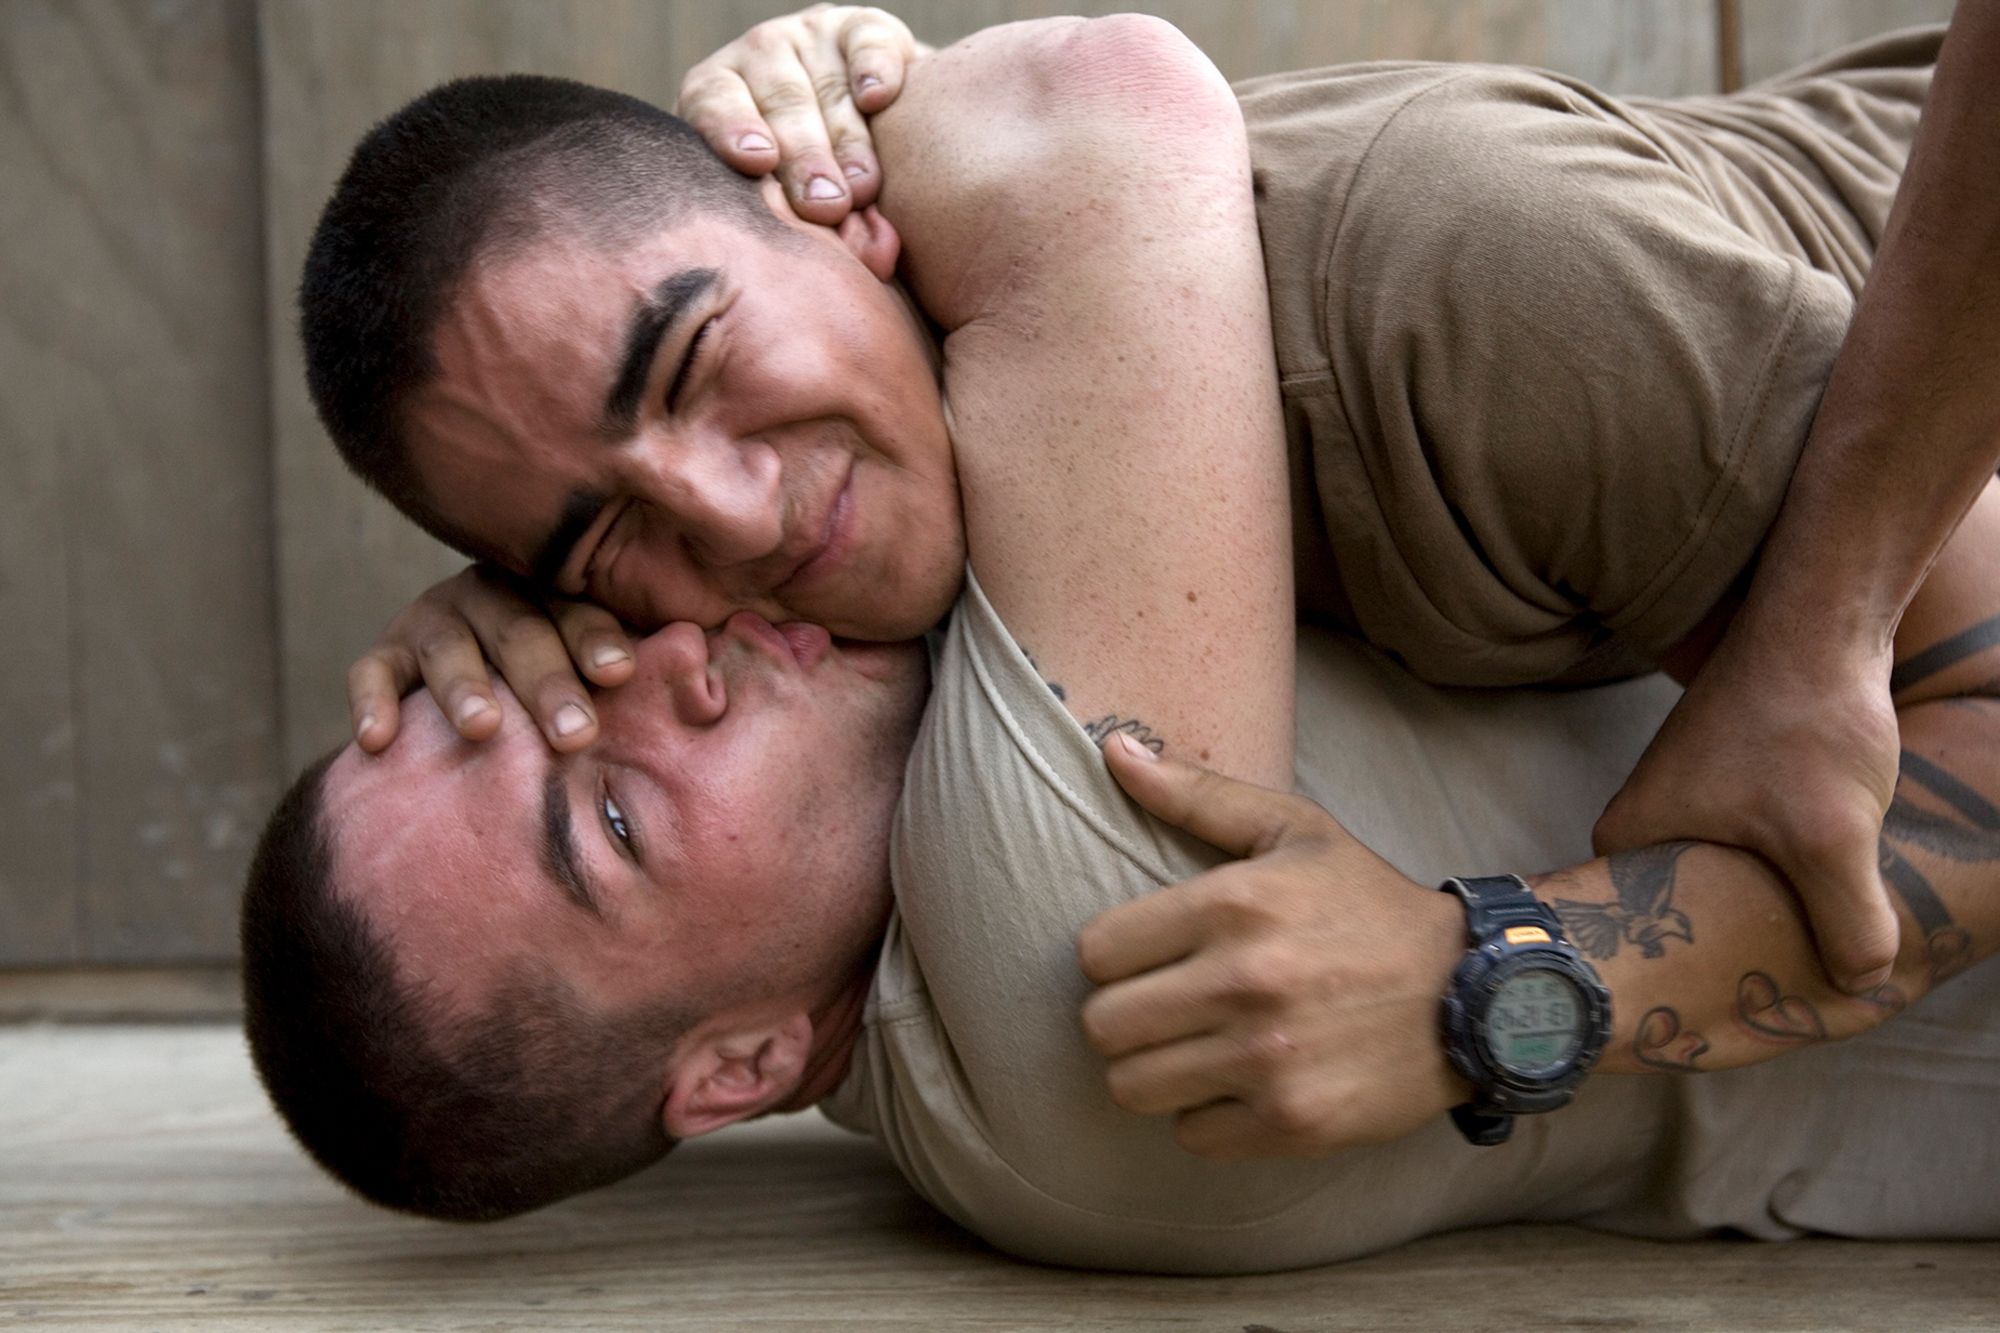 Bobby kisses Cortez during a play fight at the barracks of Second Platoon at the Korengal Outpost. Korengal Valley, Kunar Province, Afghanistan. June 2008.